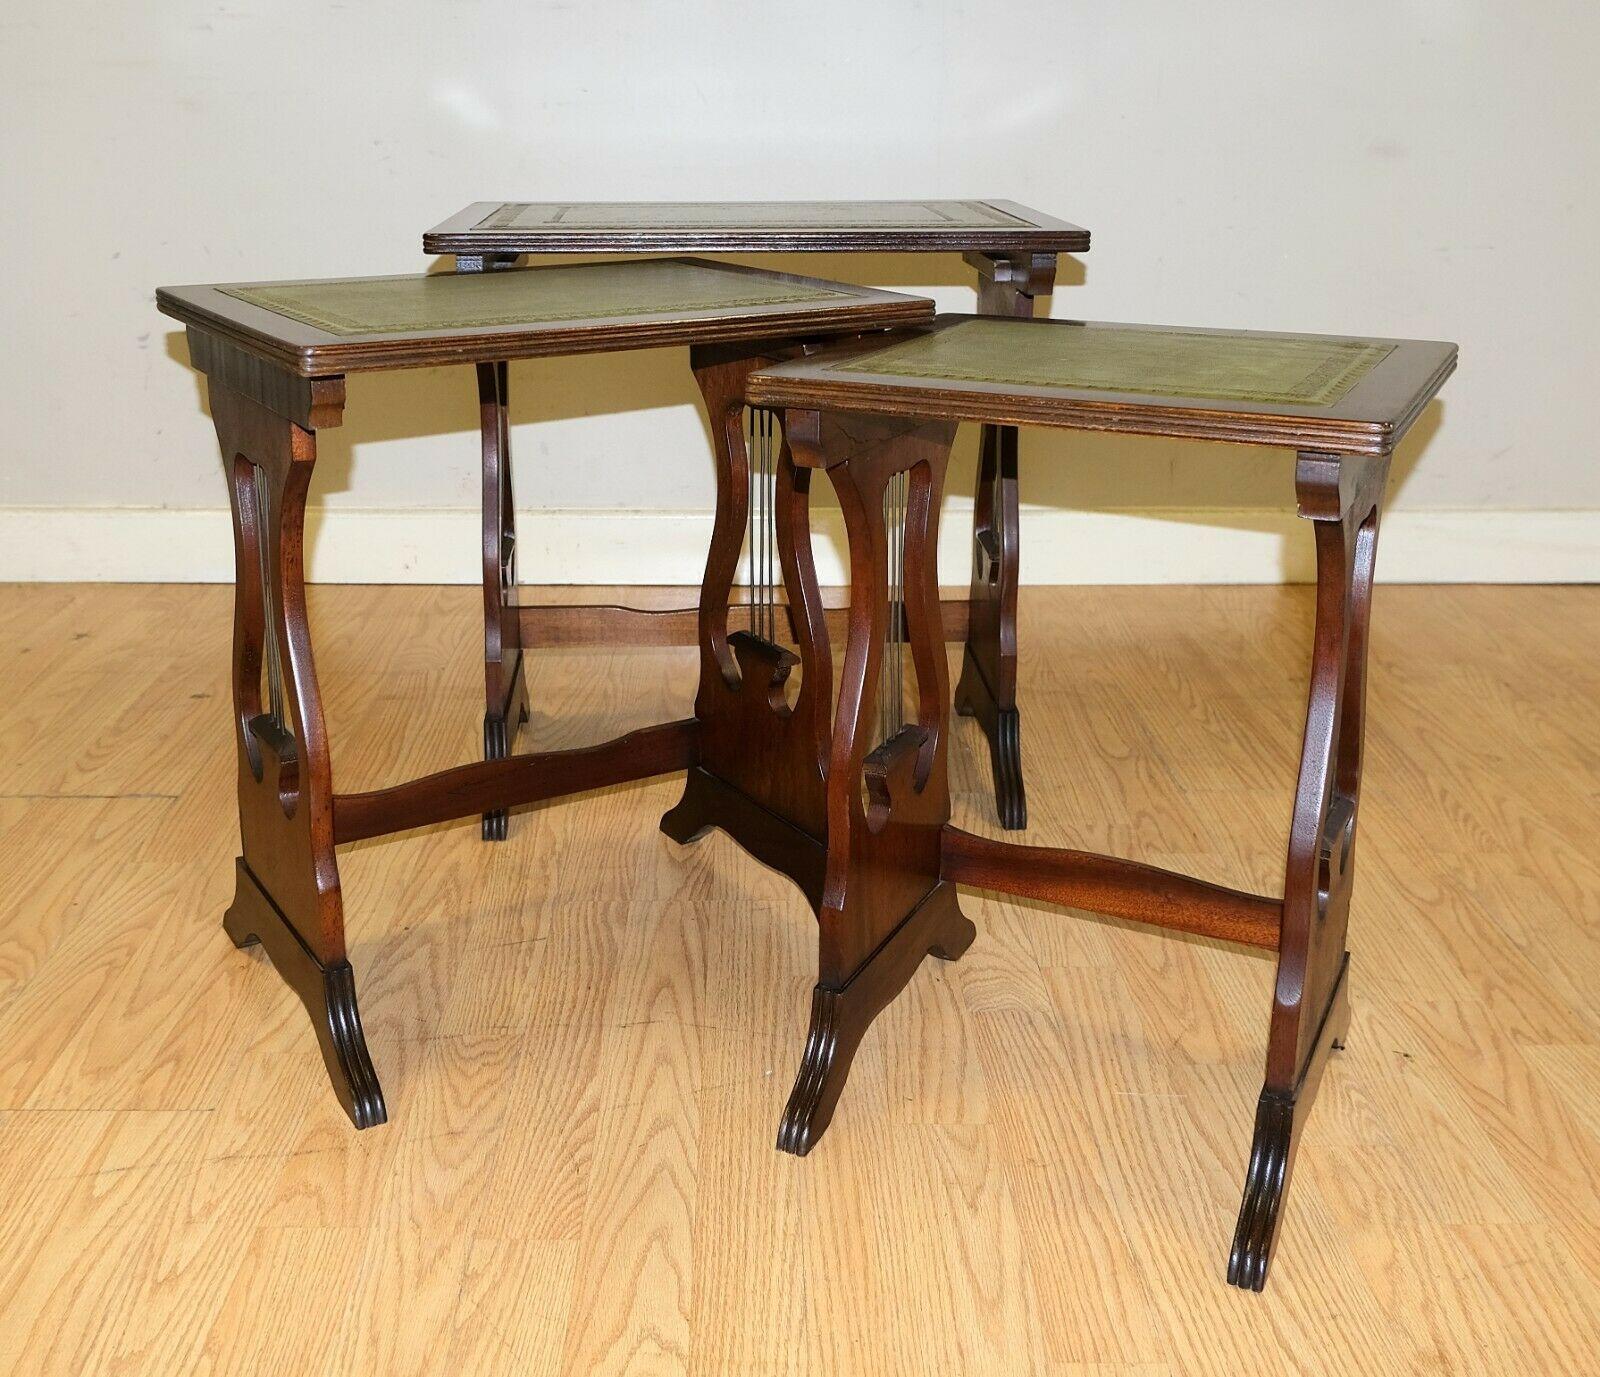 Regency Lovely Hardwood Nest of Tables Green Leather Top with Harp Shape Support Sides For Sale